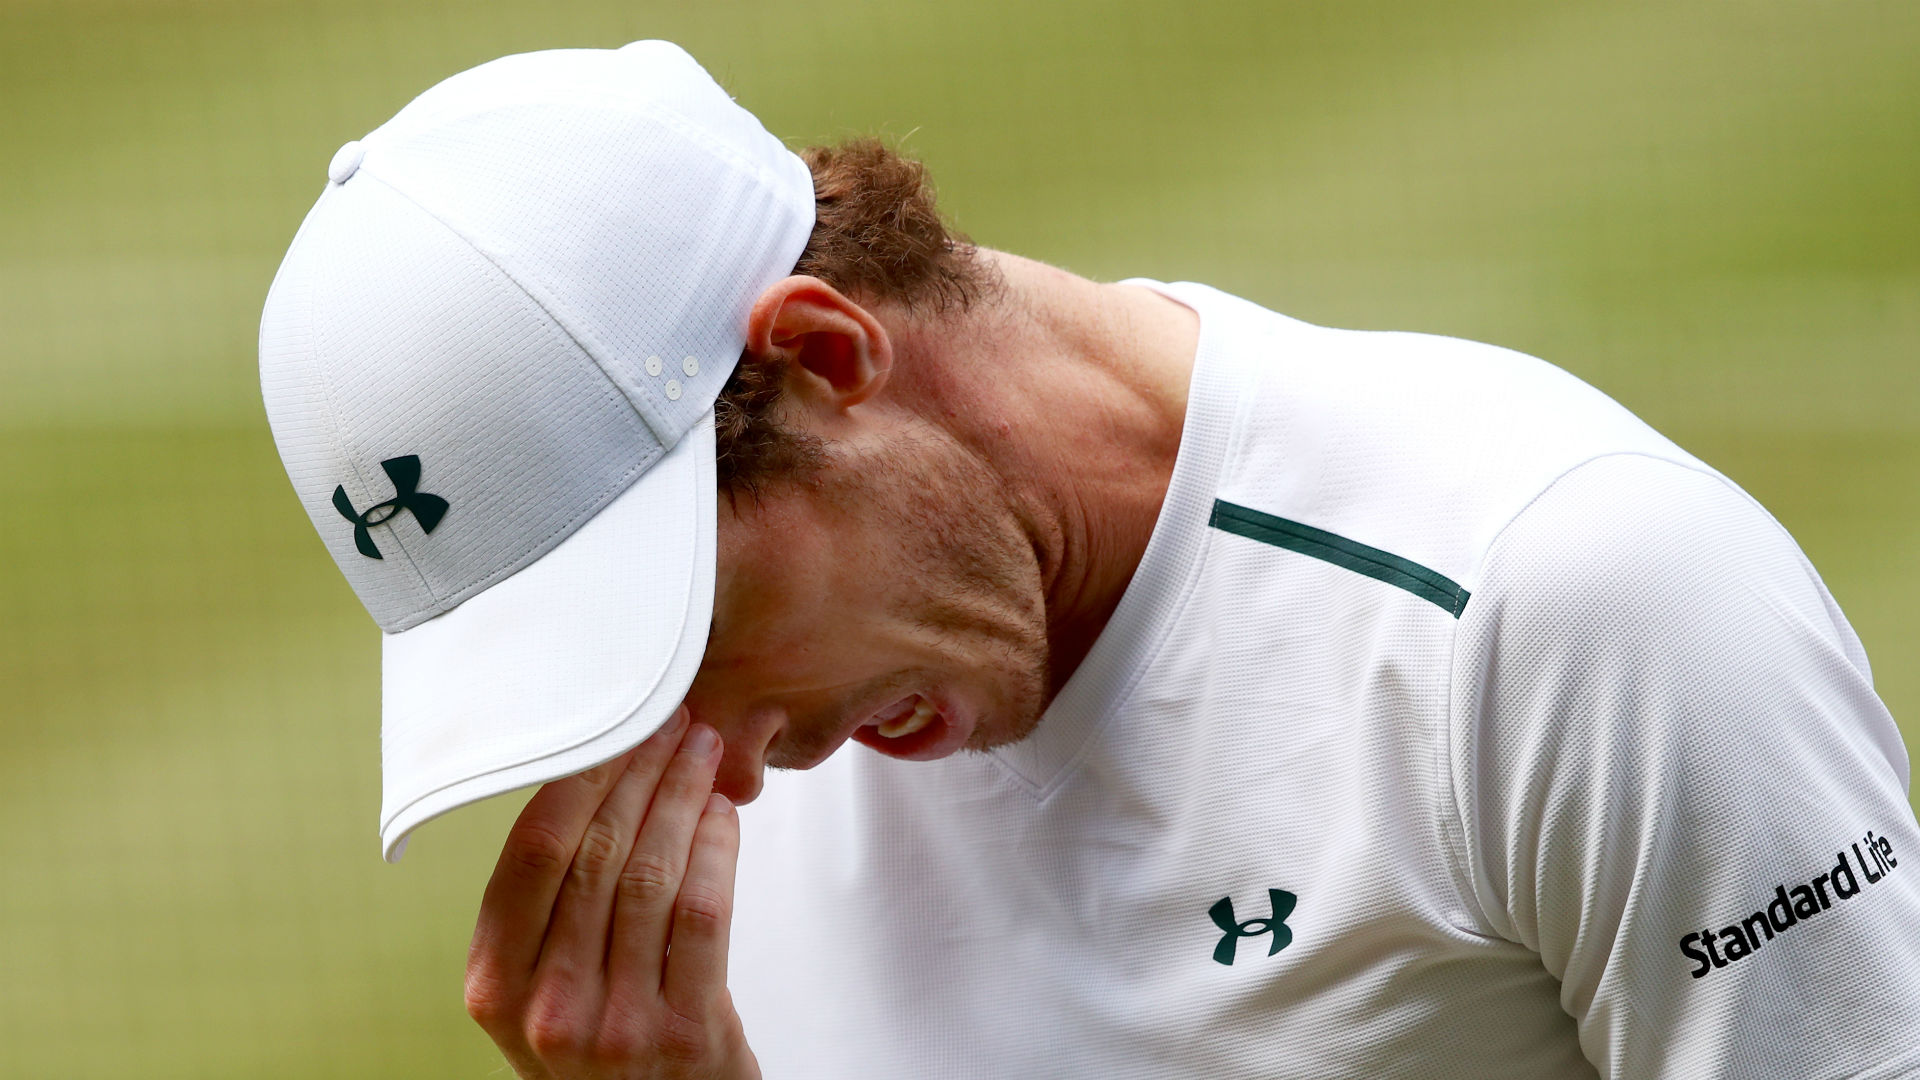 Champion Andy Murray Toppled by Sensational Querrey at Wimbledon